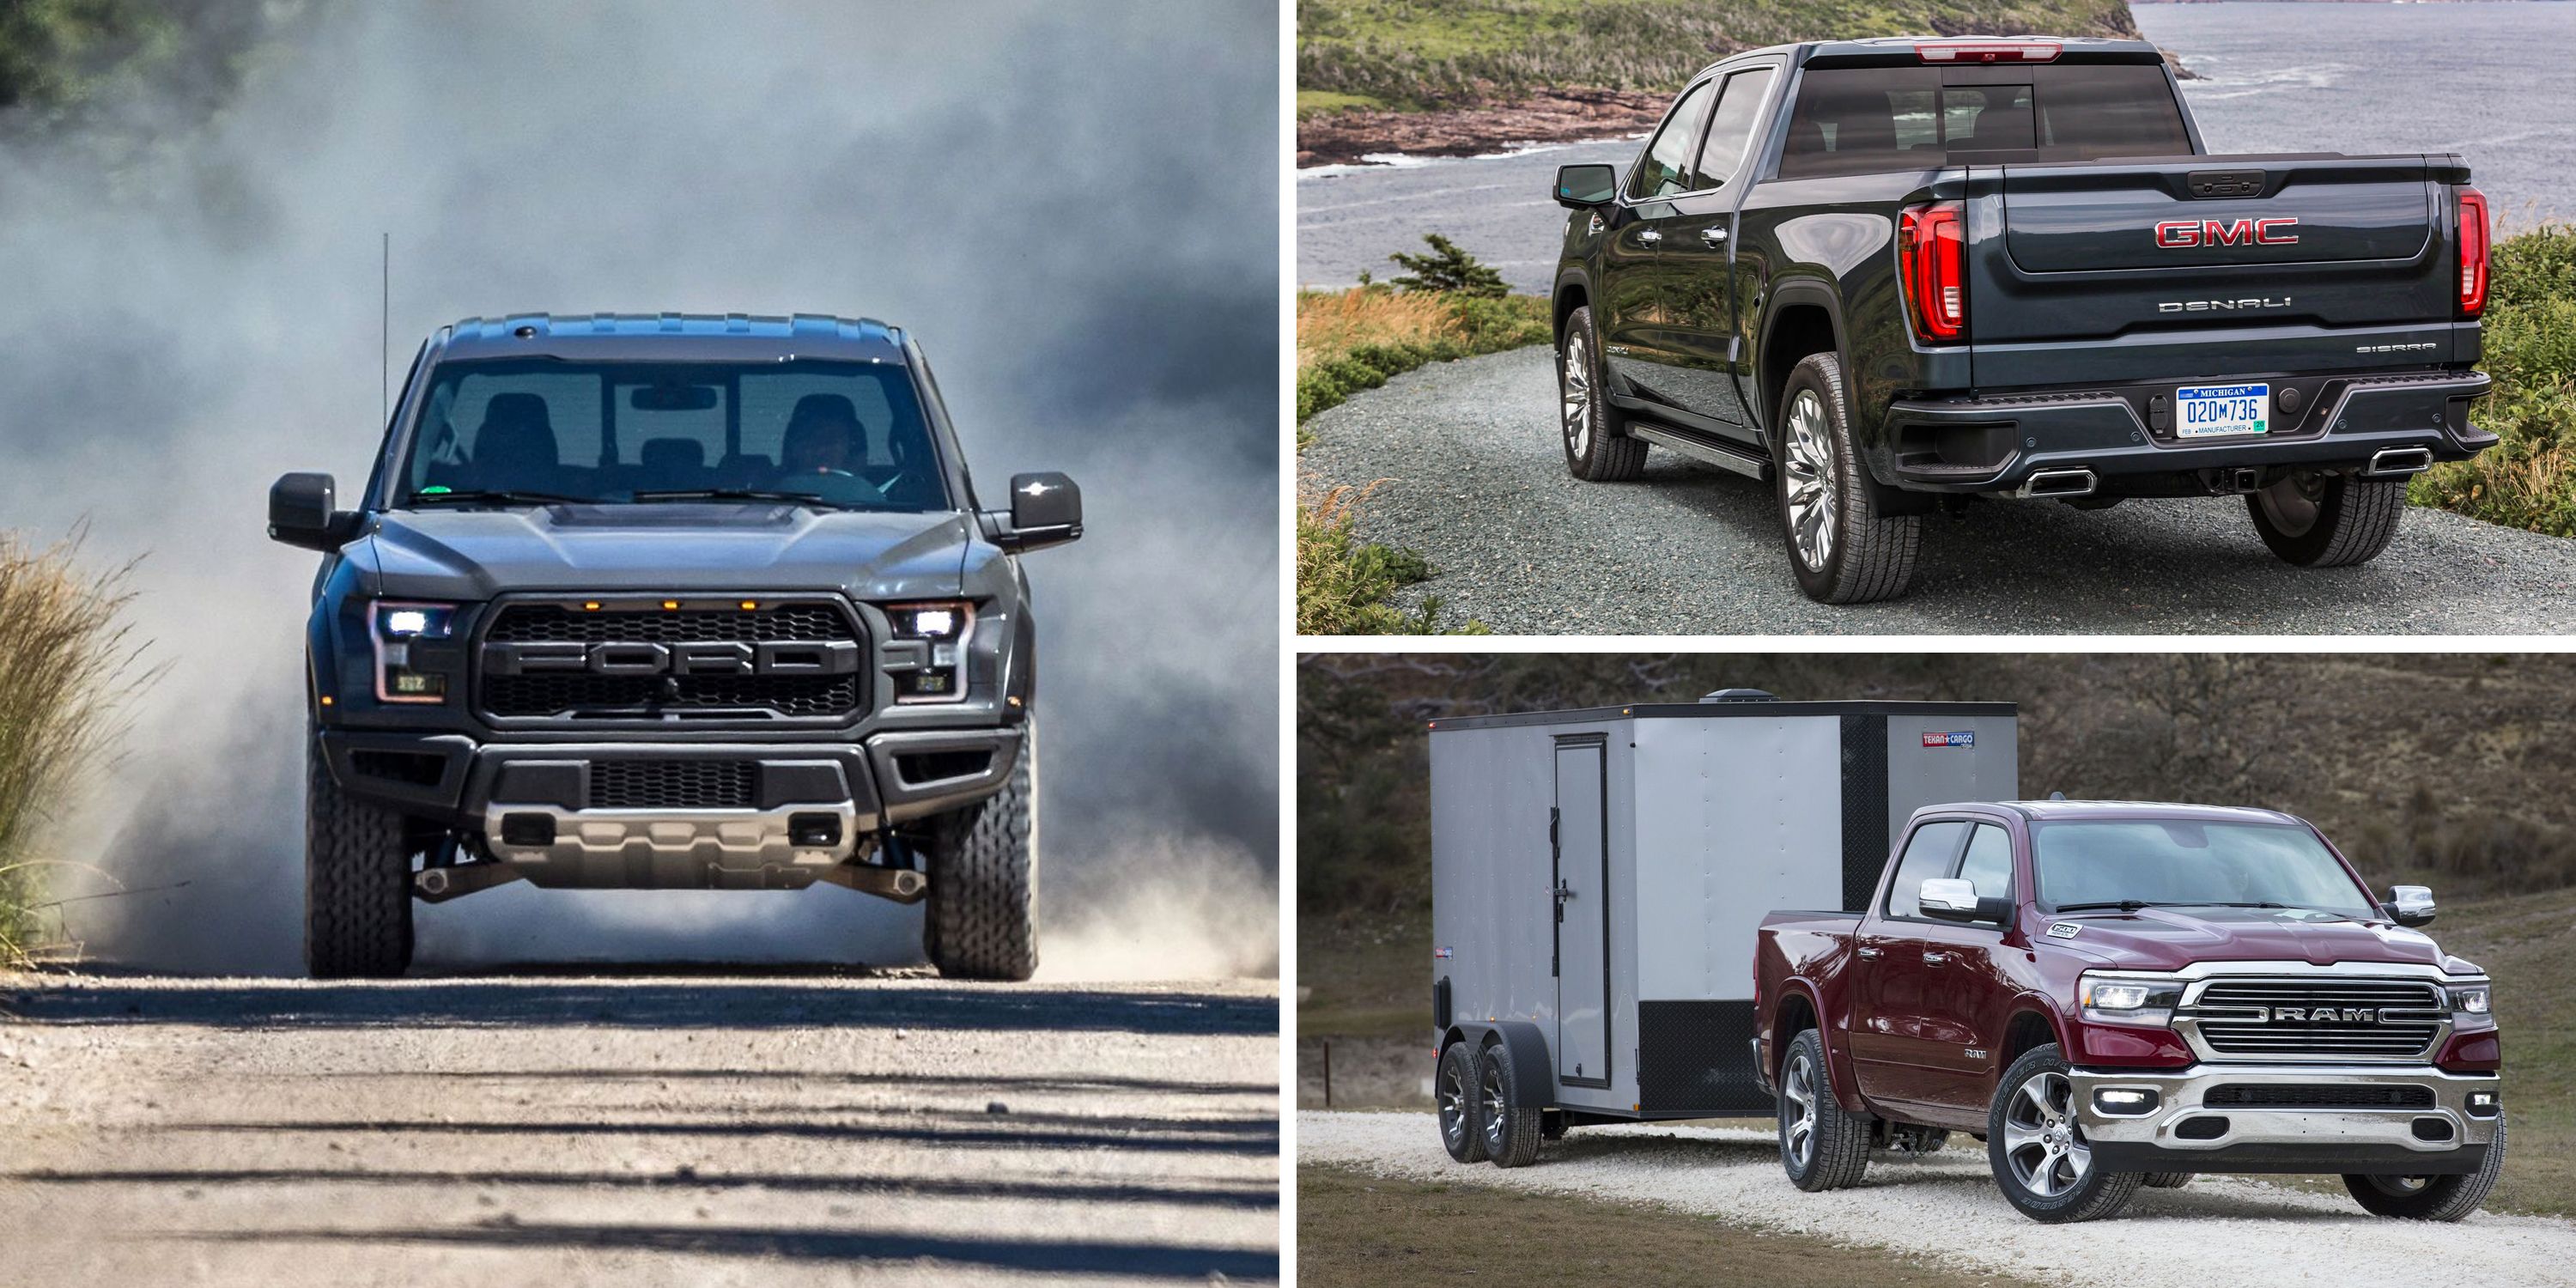 2019 Truck Towing Capacity Comparison Chart